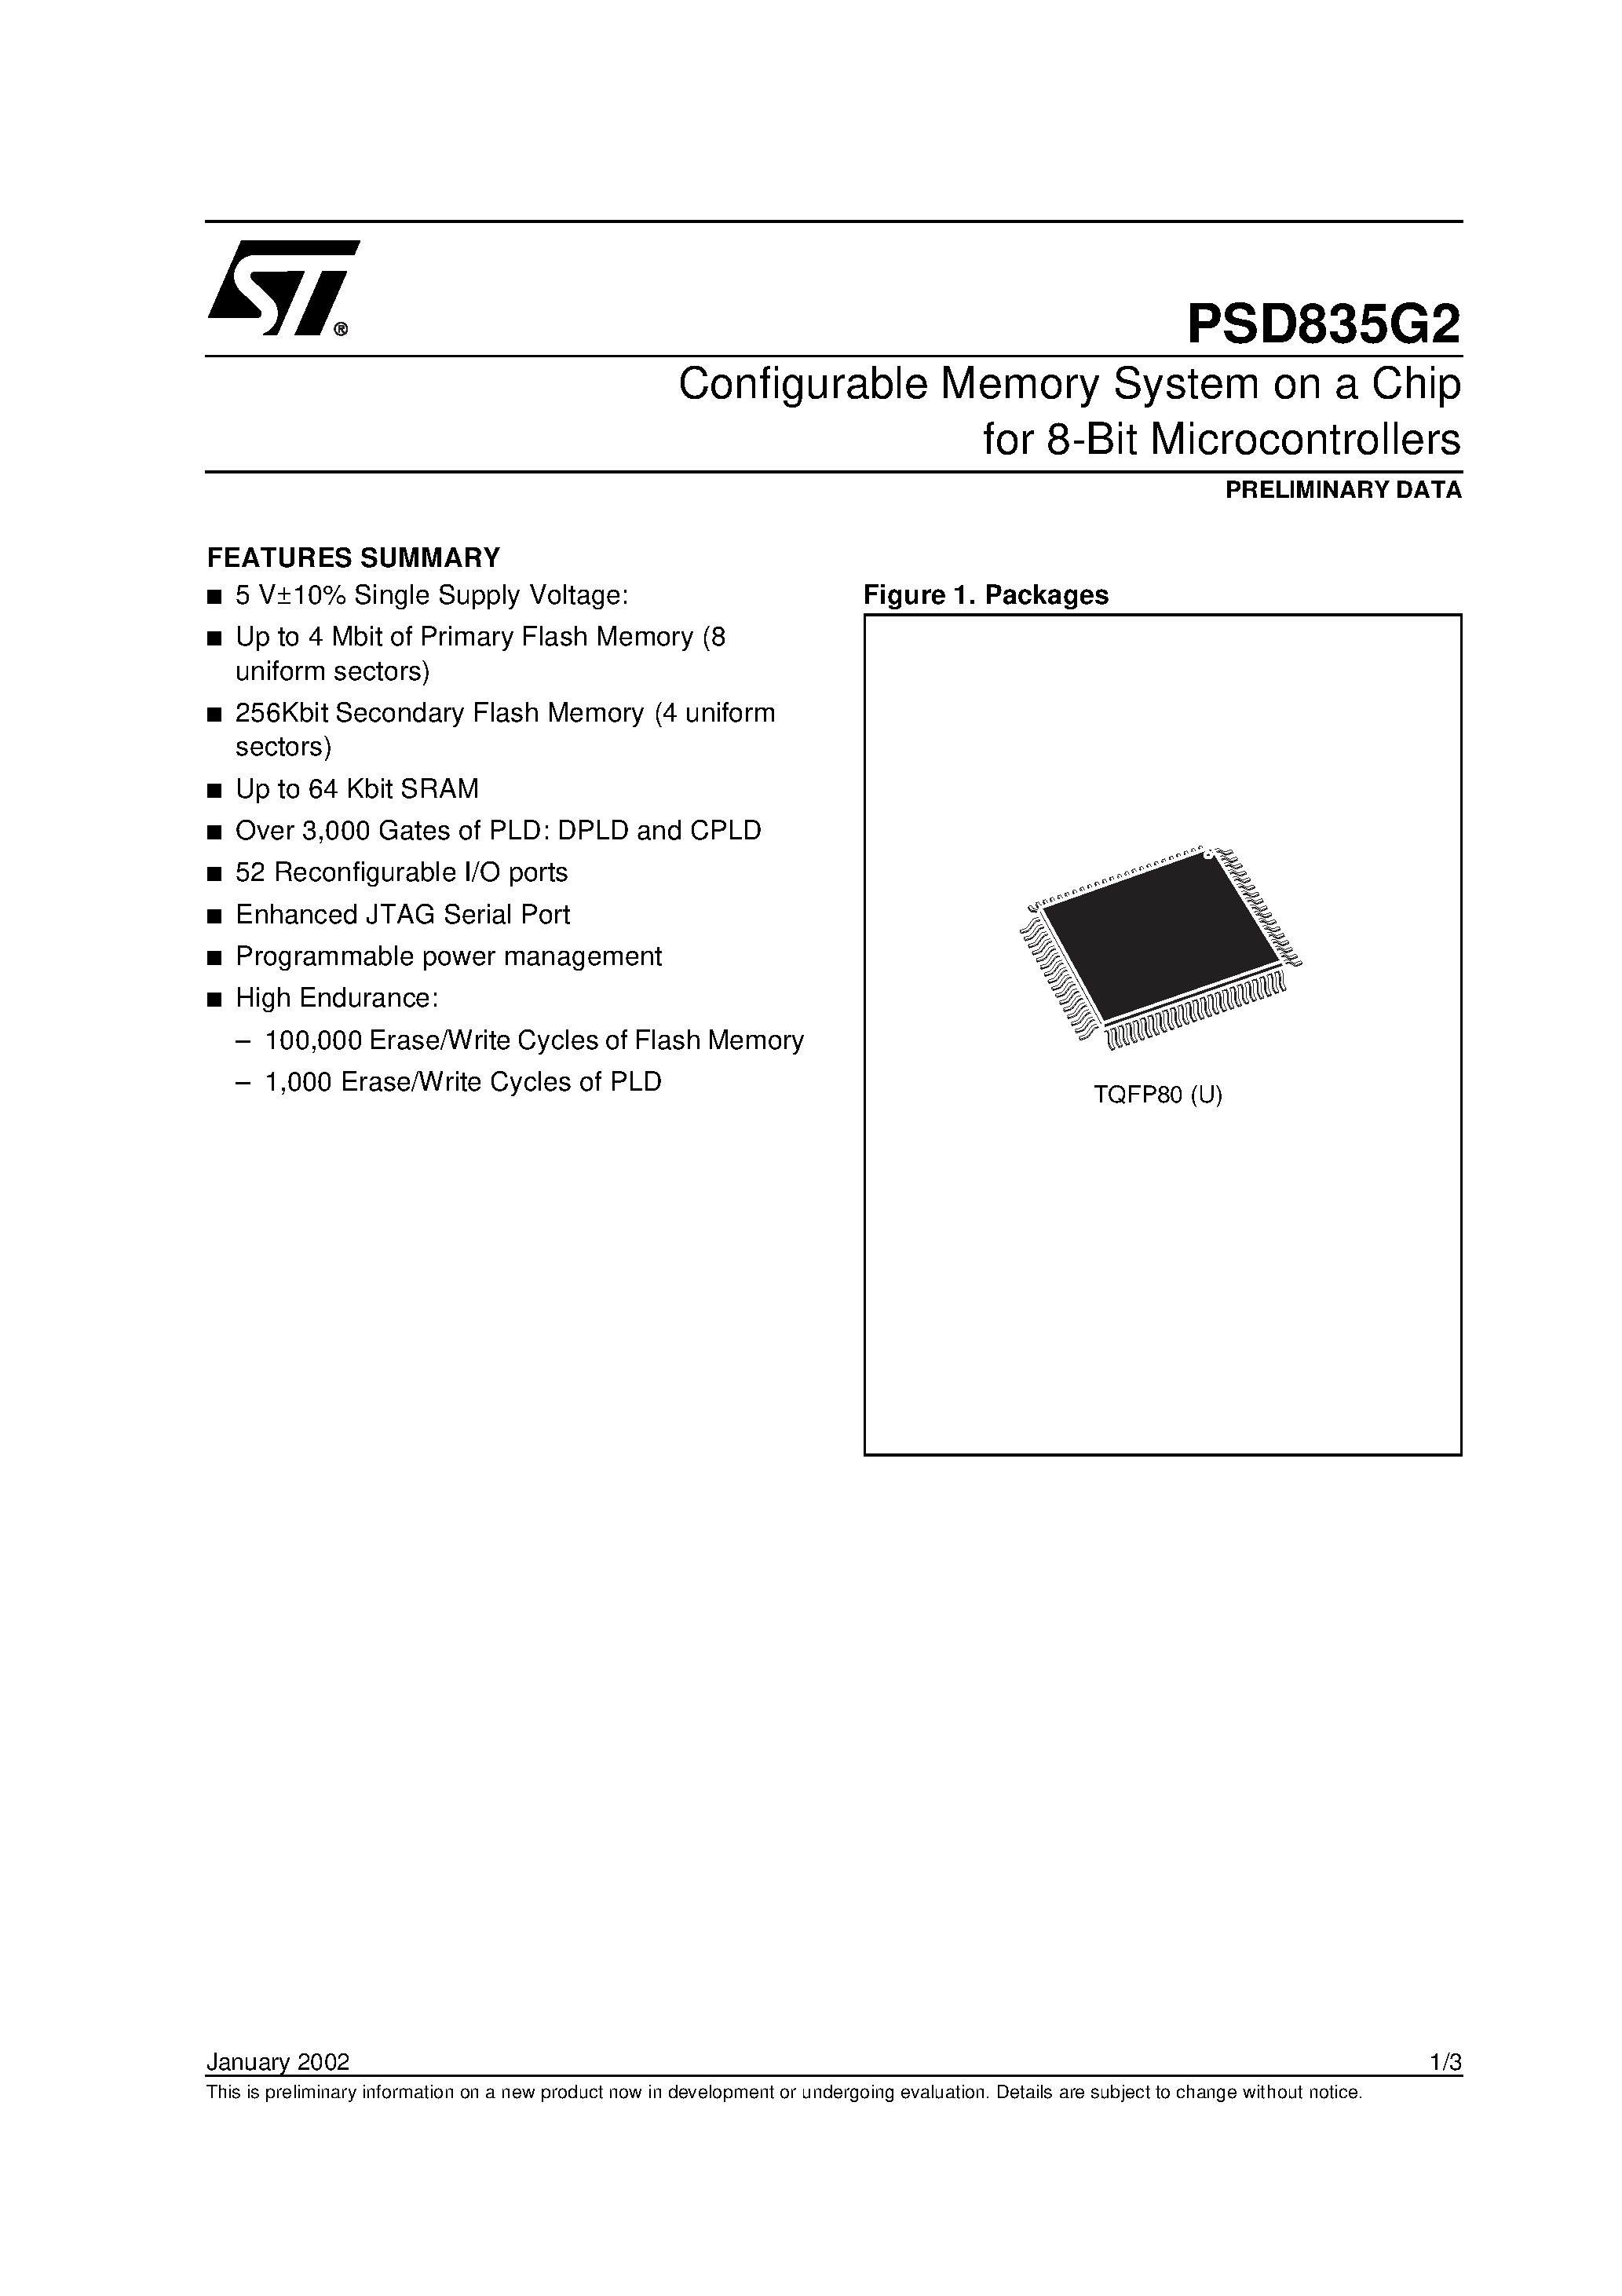 Datasheet PSD835F2-A-90UI - Configurable Memory System on a Chip for 8-Bit Microcontrollers page 1